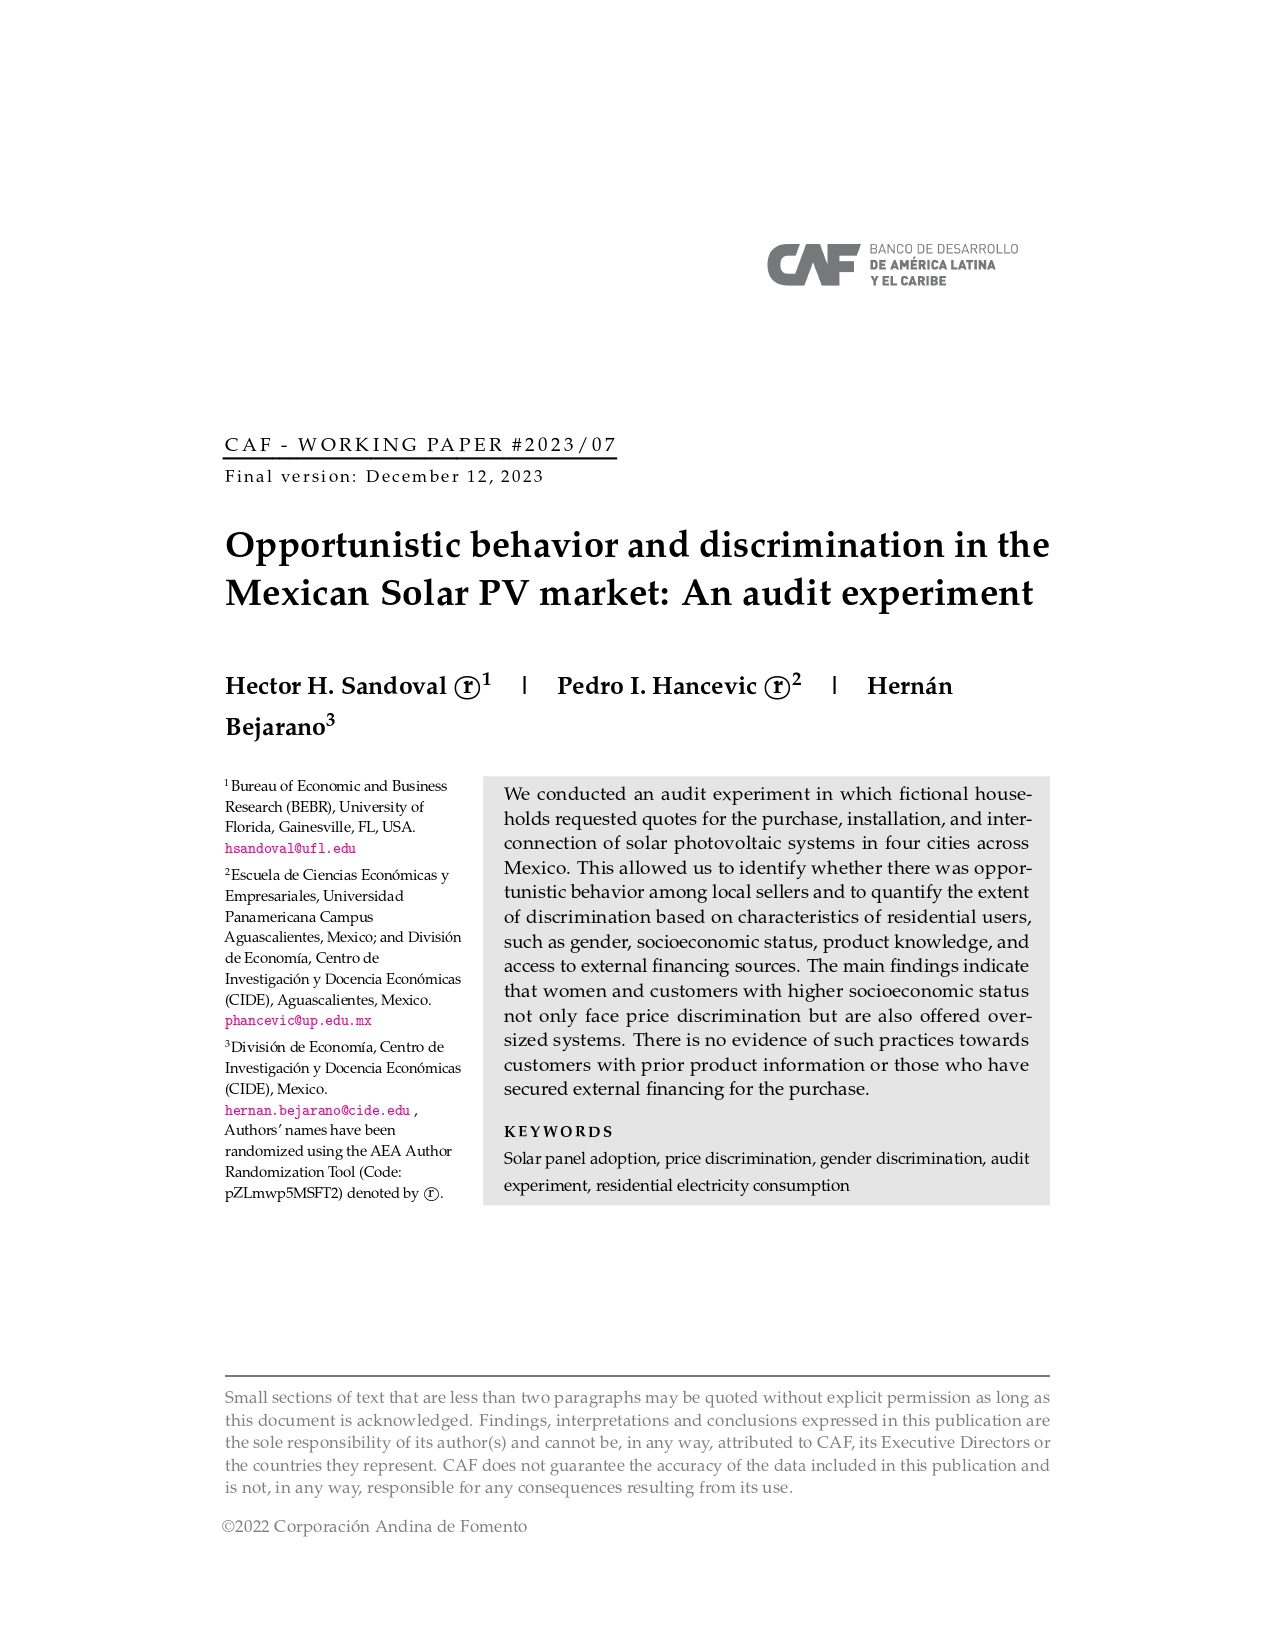 Opportunistic behavior and discrimination in the Mexican Solar PV market: An audit experiment